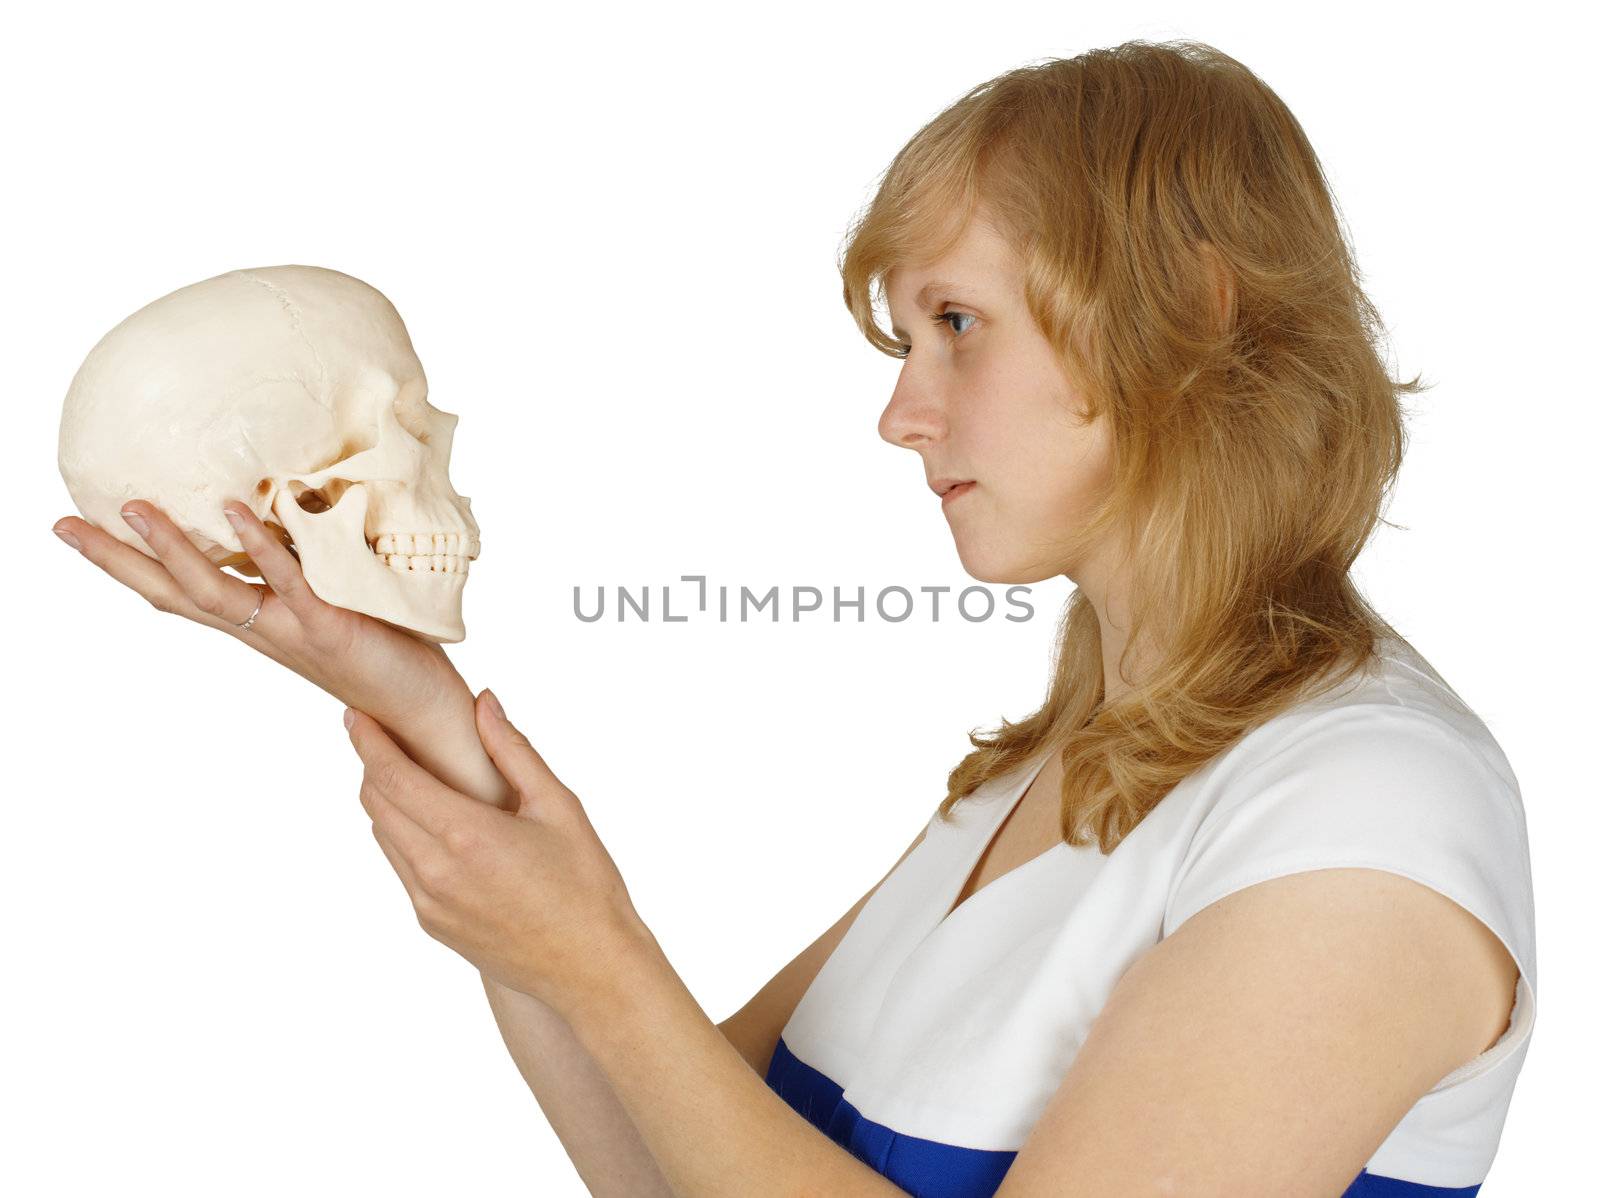 A woman examines a human skull isolated on white background